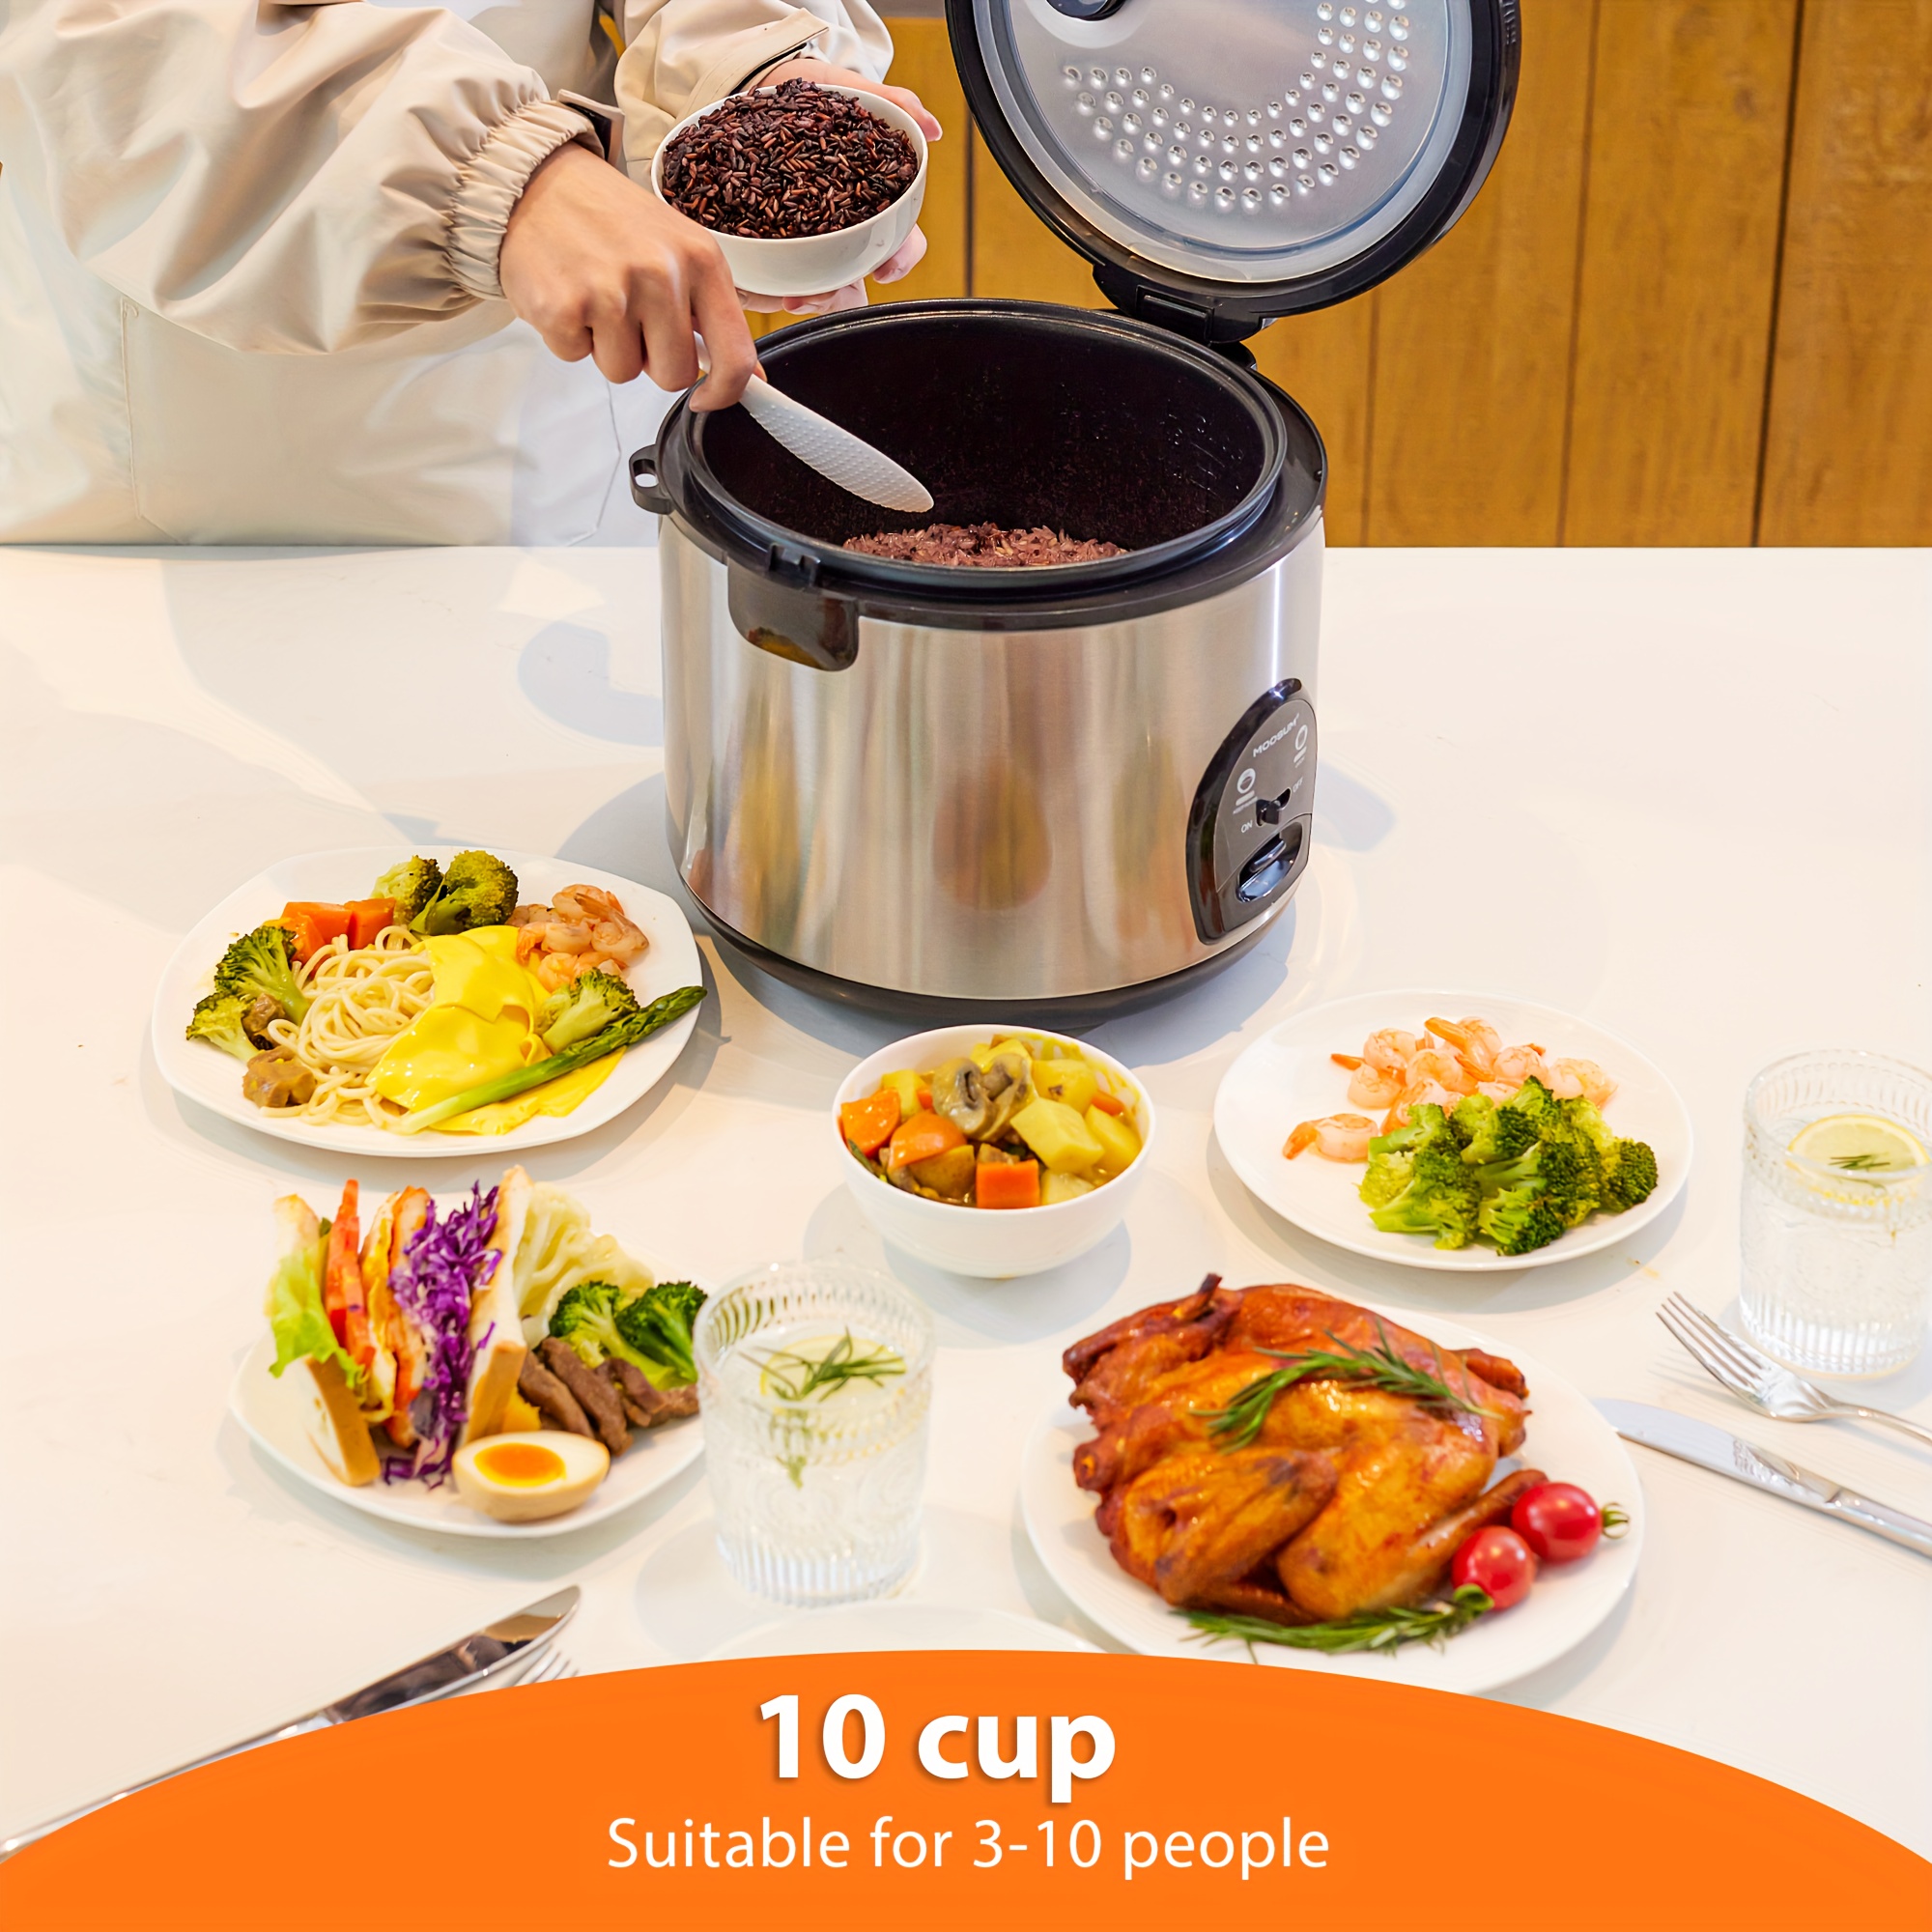 Moosum Electric Rice Cooker With One Touch For Asian Japanese Sushi Rice, 3- cup Uncooked/6-cup Cooked, Fast&convenient Cooker With Ceramic Nonstick Inner  Pot, Stainless Steel Housing And Auto Warmer - Temu